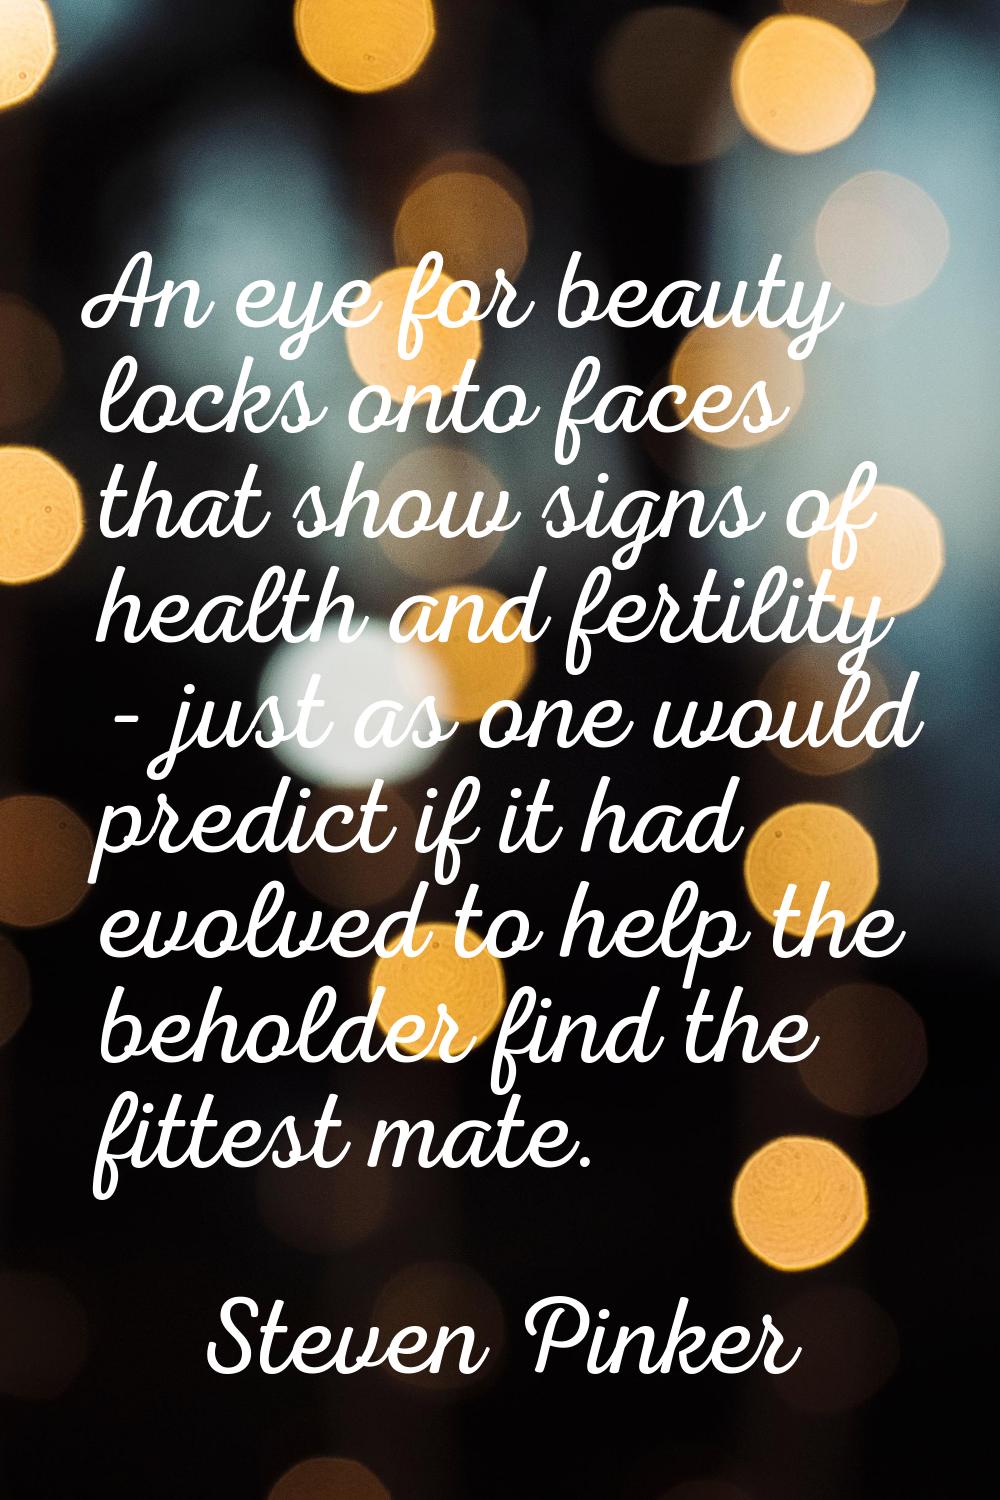 An eye for beauty locks onto faces that show signs of health and fertility - just as one would pred